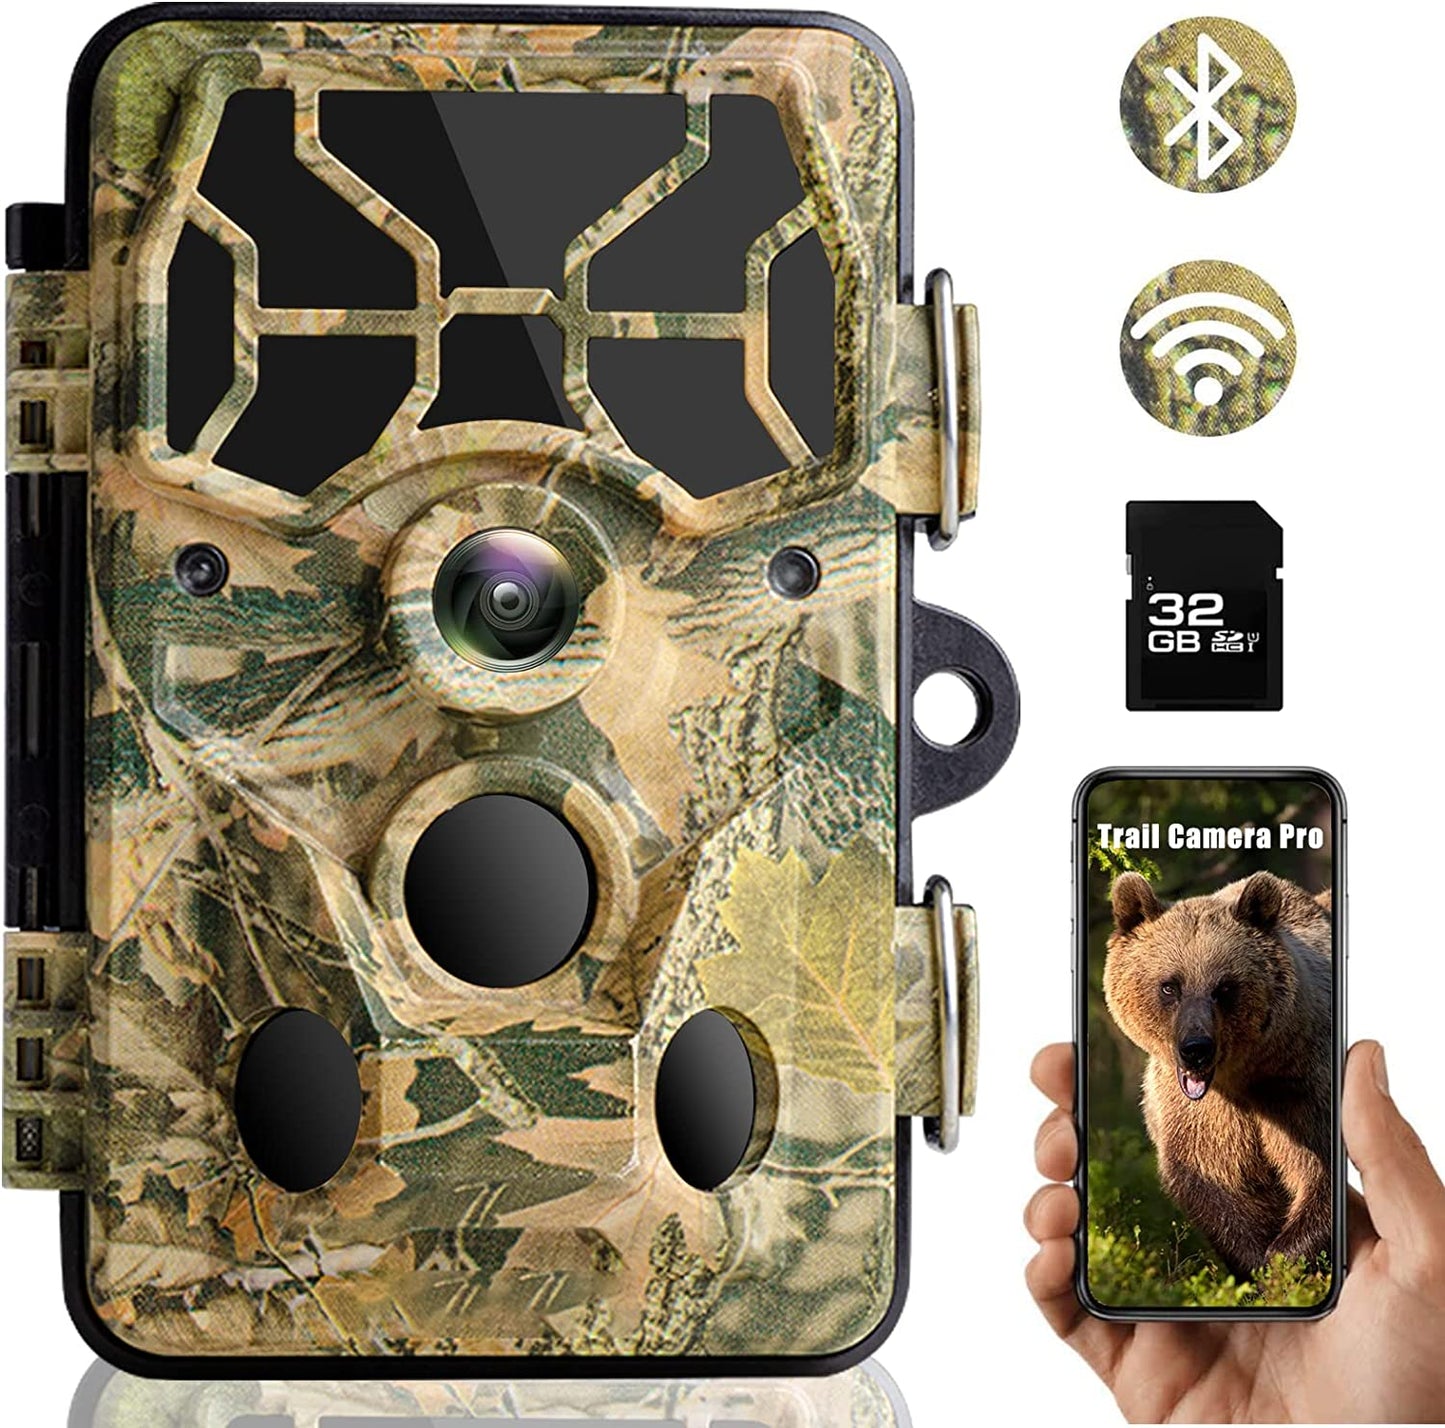 TOGUARD Trail Camera with SD Card WiFi Bluetooth 20MP 1296P Game Camera with 3PIR Night Vision Waterproof IP66 Motion Detection 120° Wide Angle Trail Cam for Hunting Wildlife Monitoring